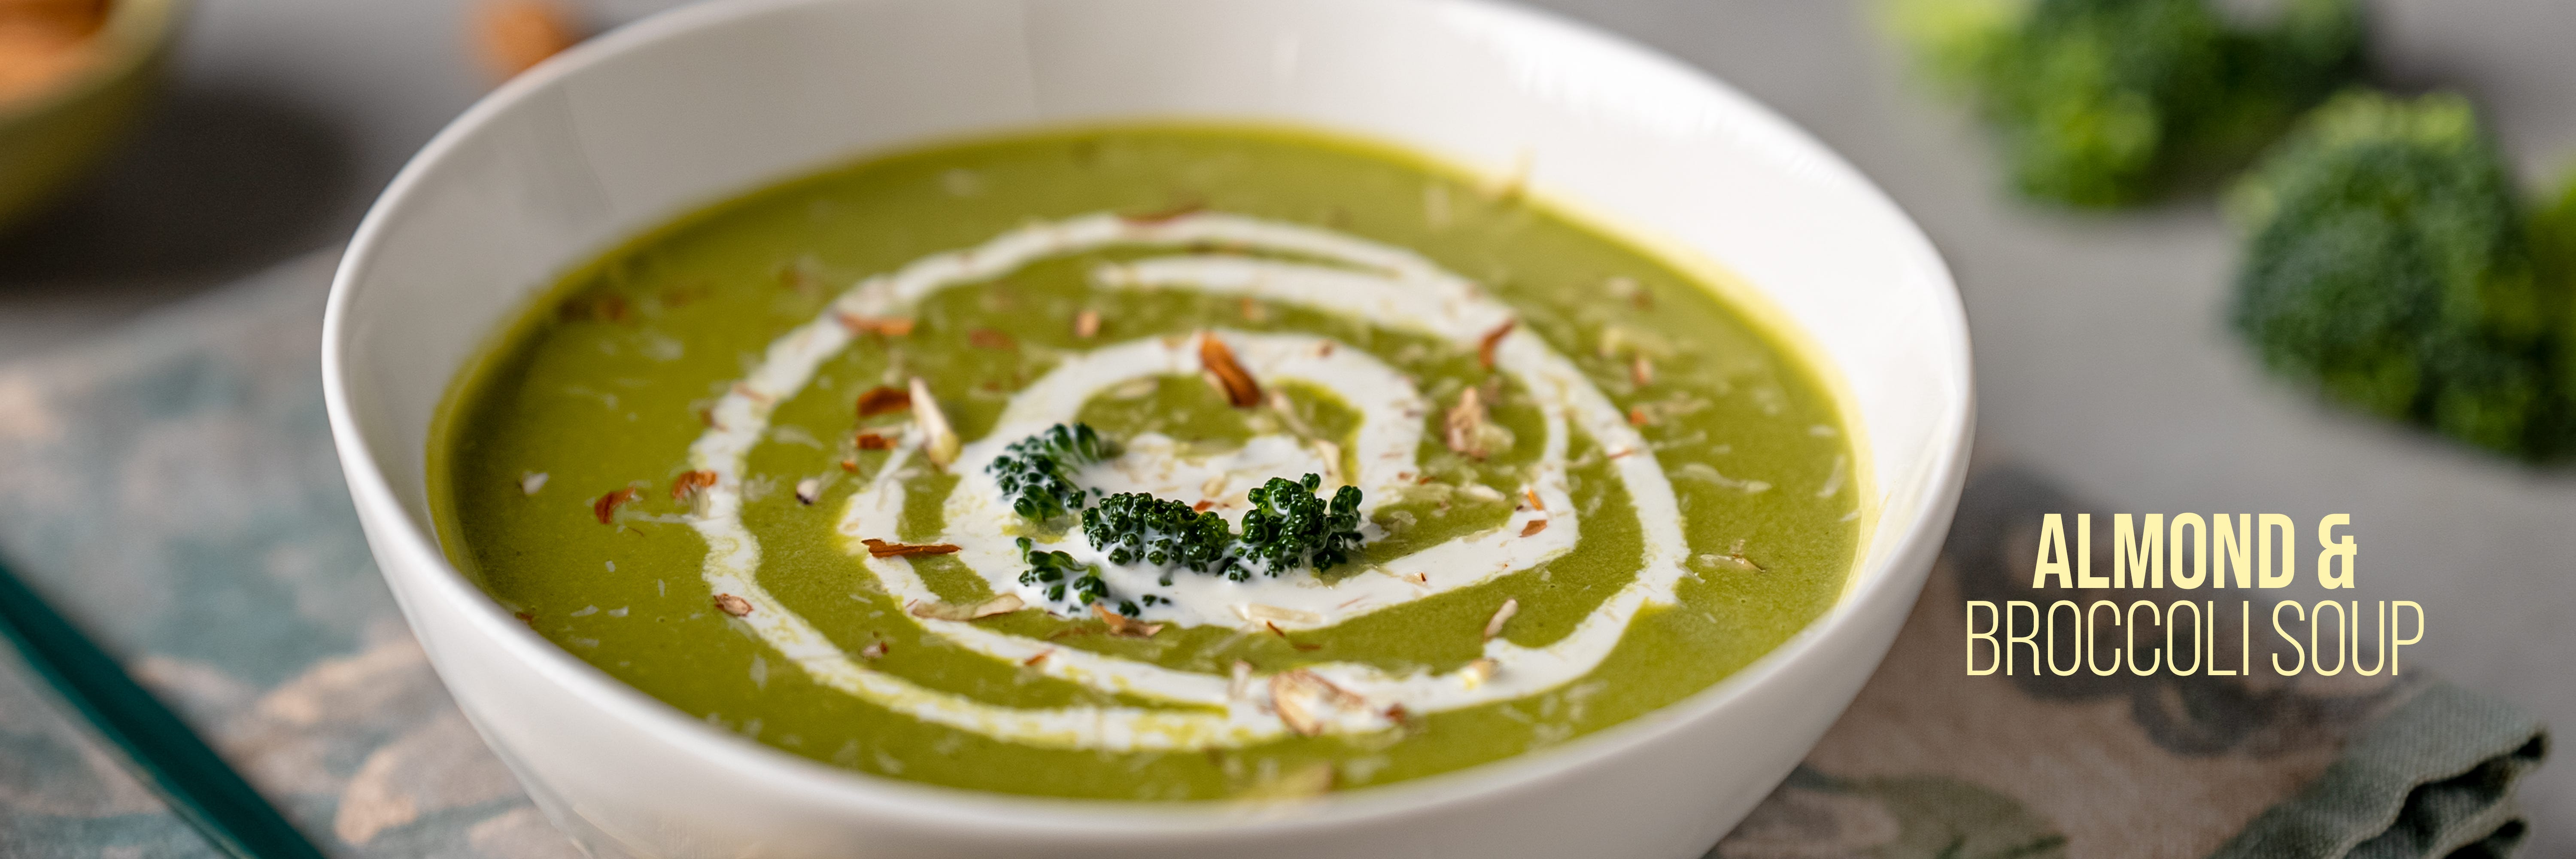 Almond & Broccoli Soup in Microwave Oven